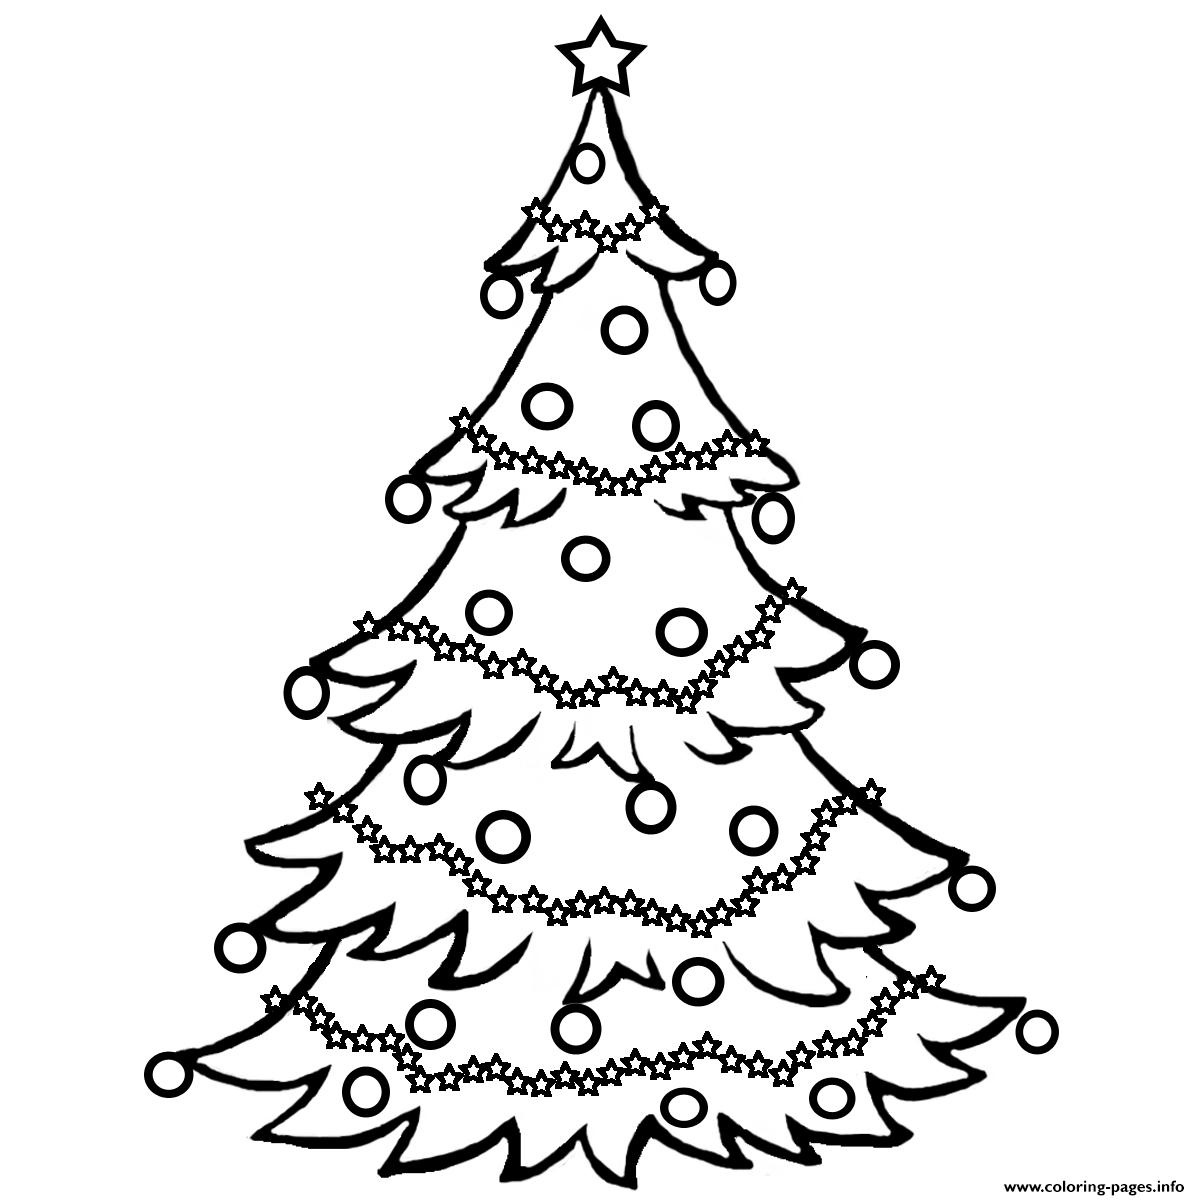 Christmas Tree Free0Ff6 Coloring Pages Printable - Free Printable Christmas Tree Images